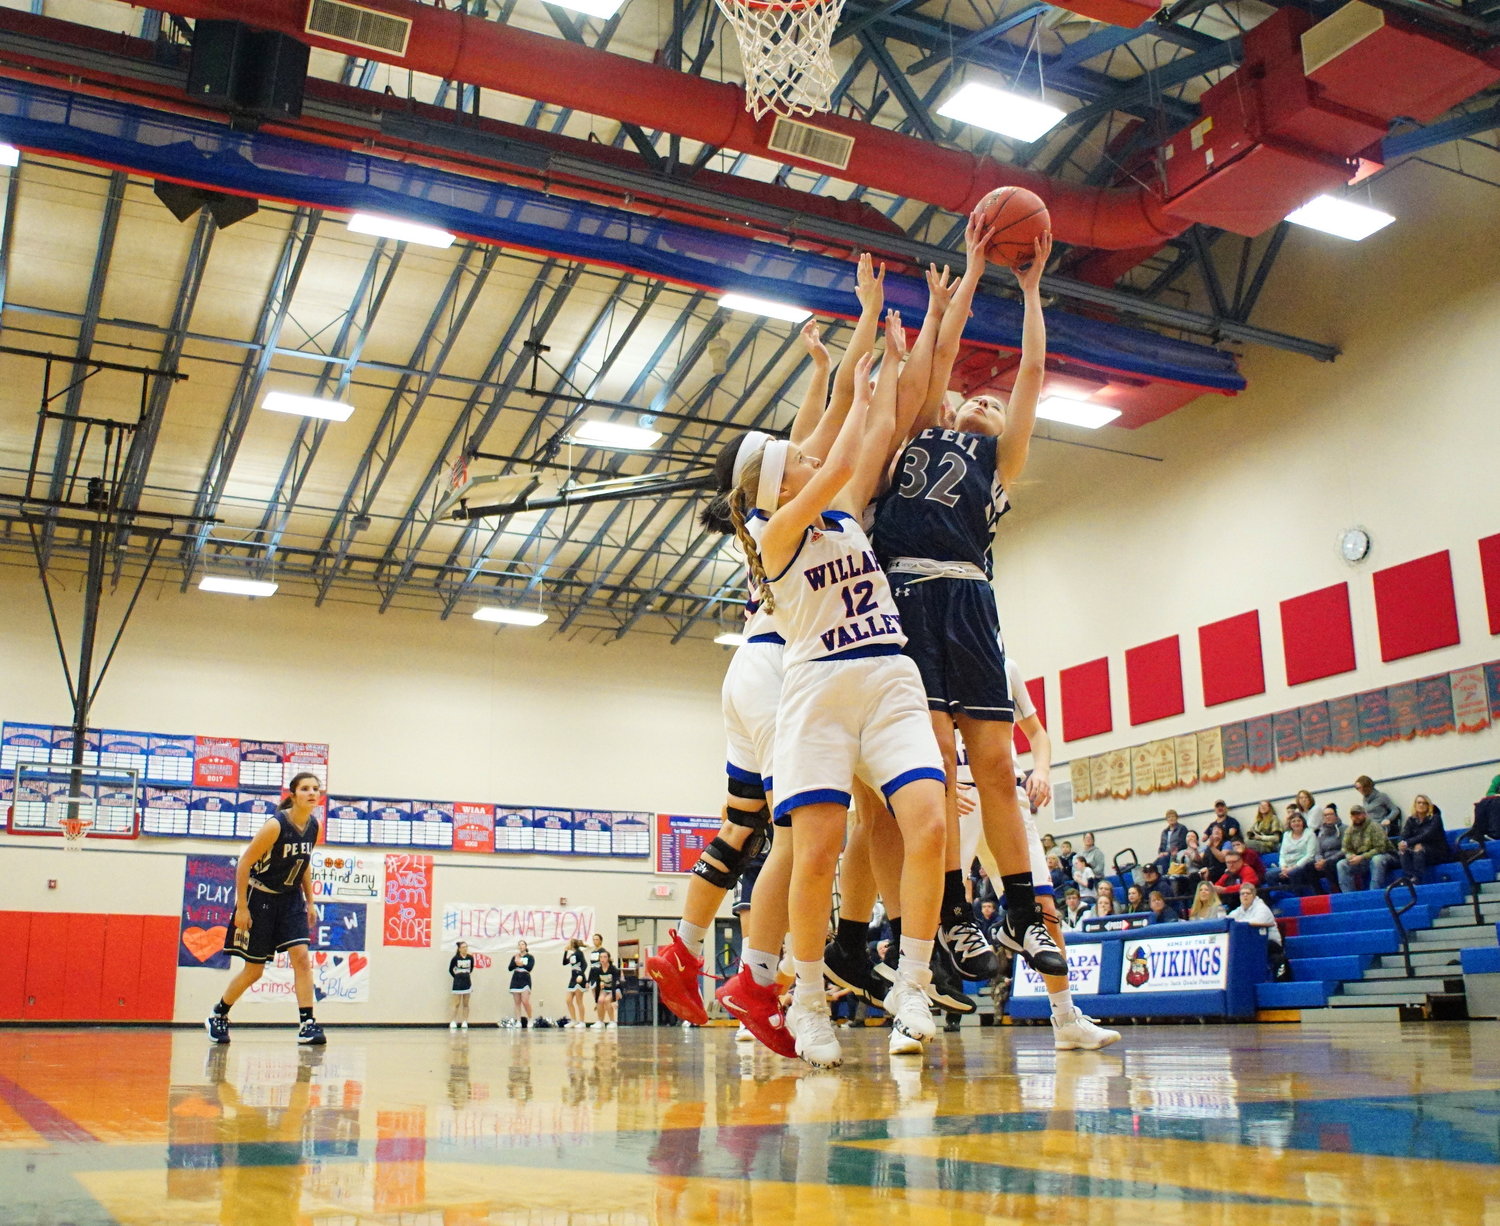 Trojan's Charlie Carper (32) snags a rebound during a game against Willapa Valley Thursday night in Menlo.